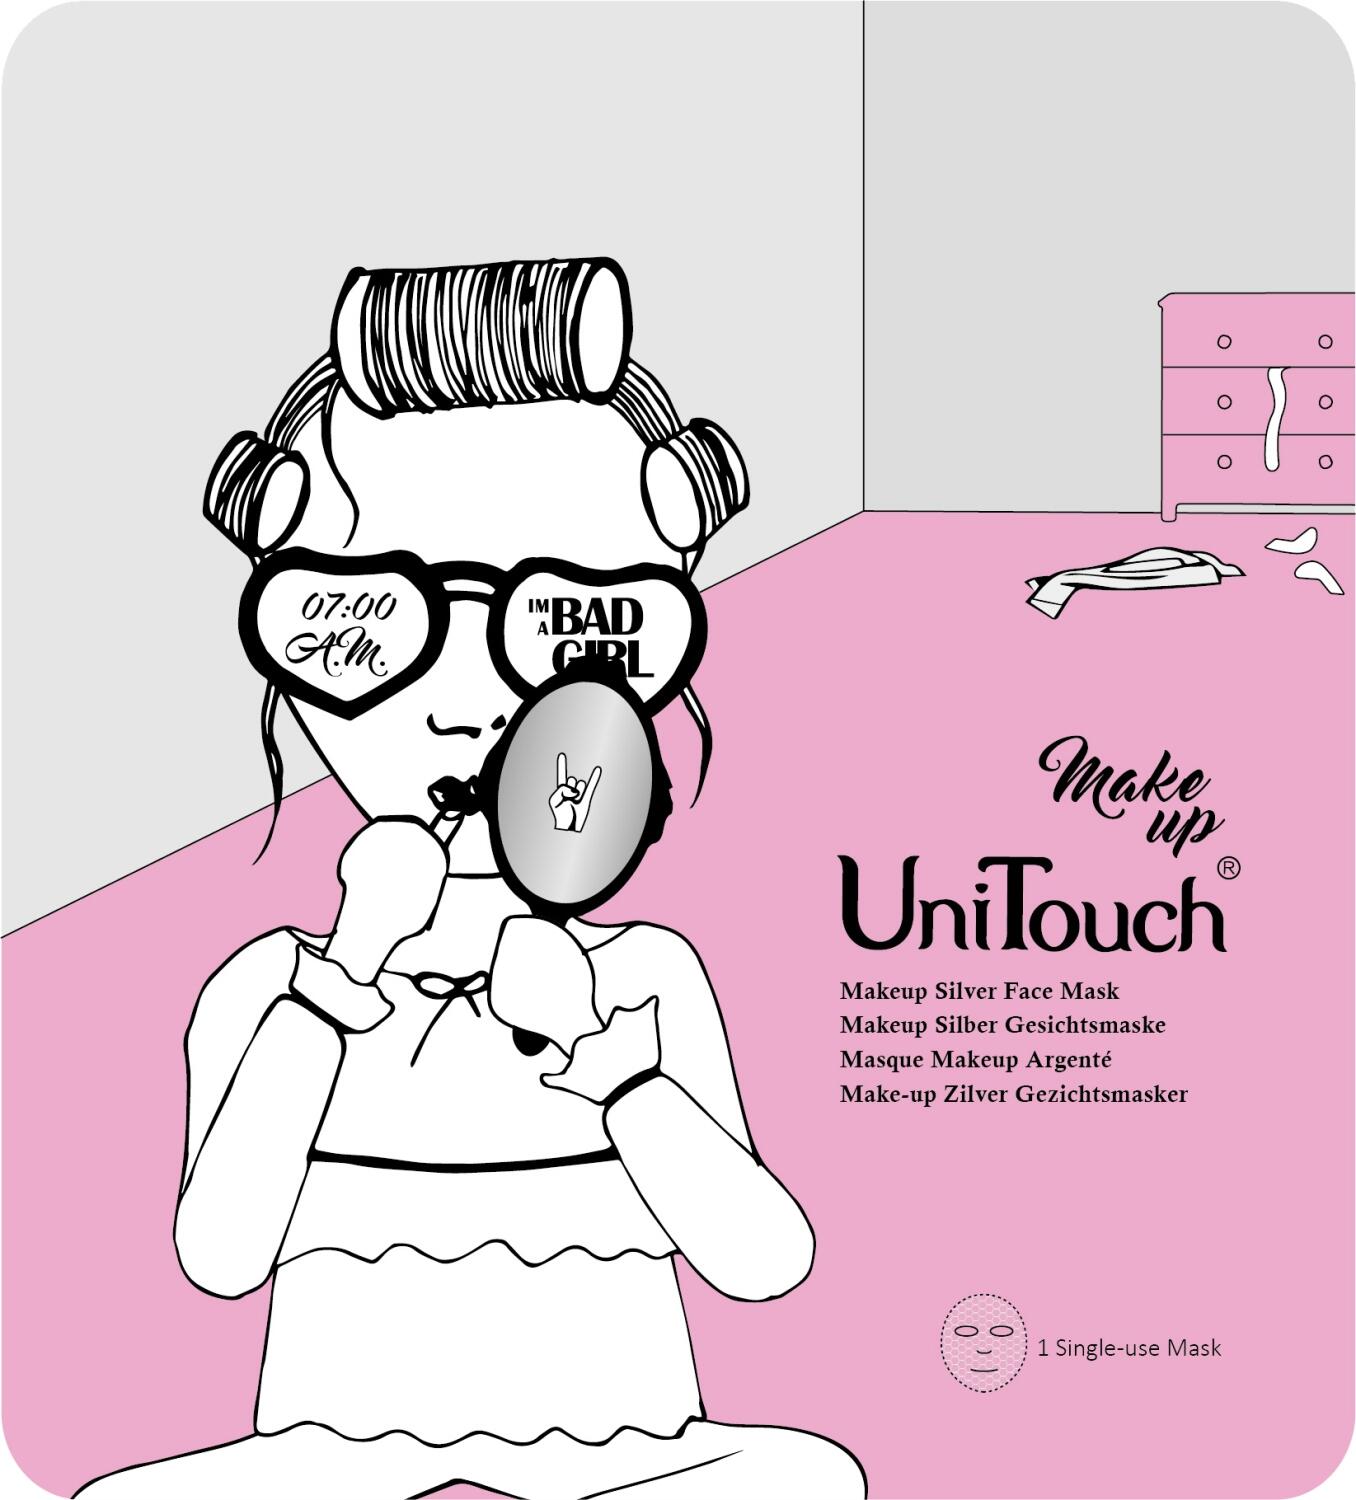 UNITOUCH Makeup Silver Face Mask